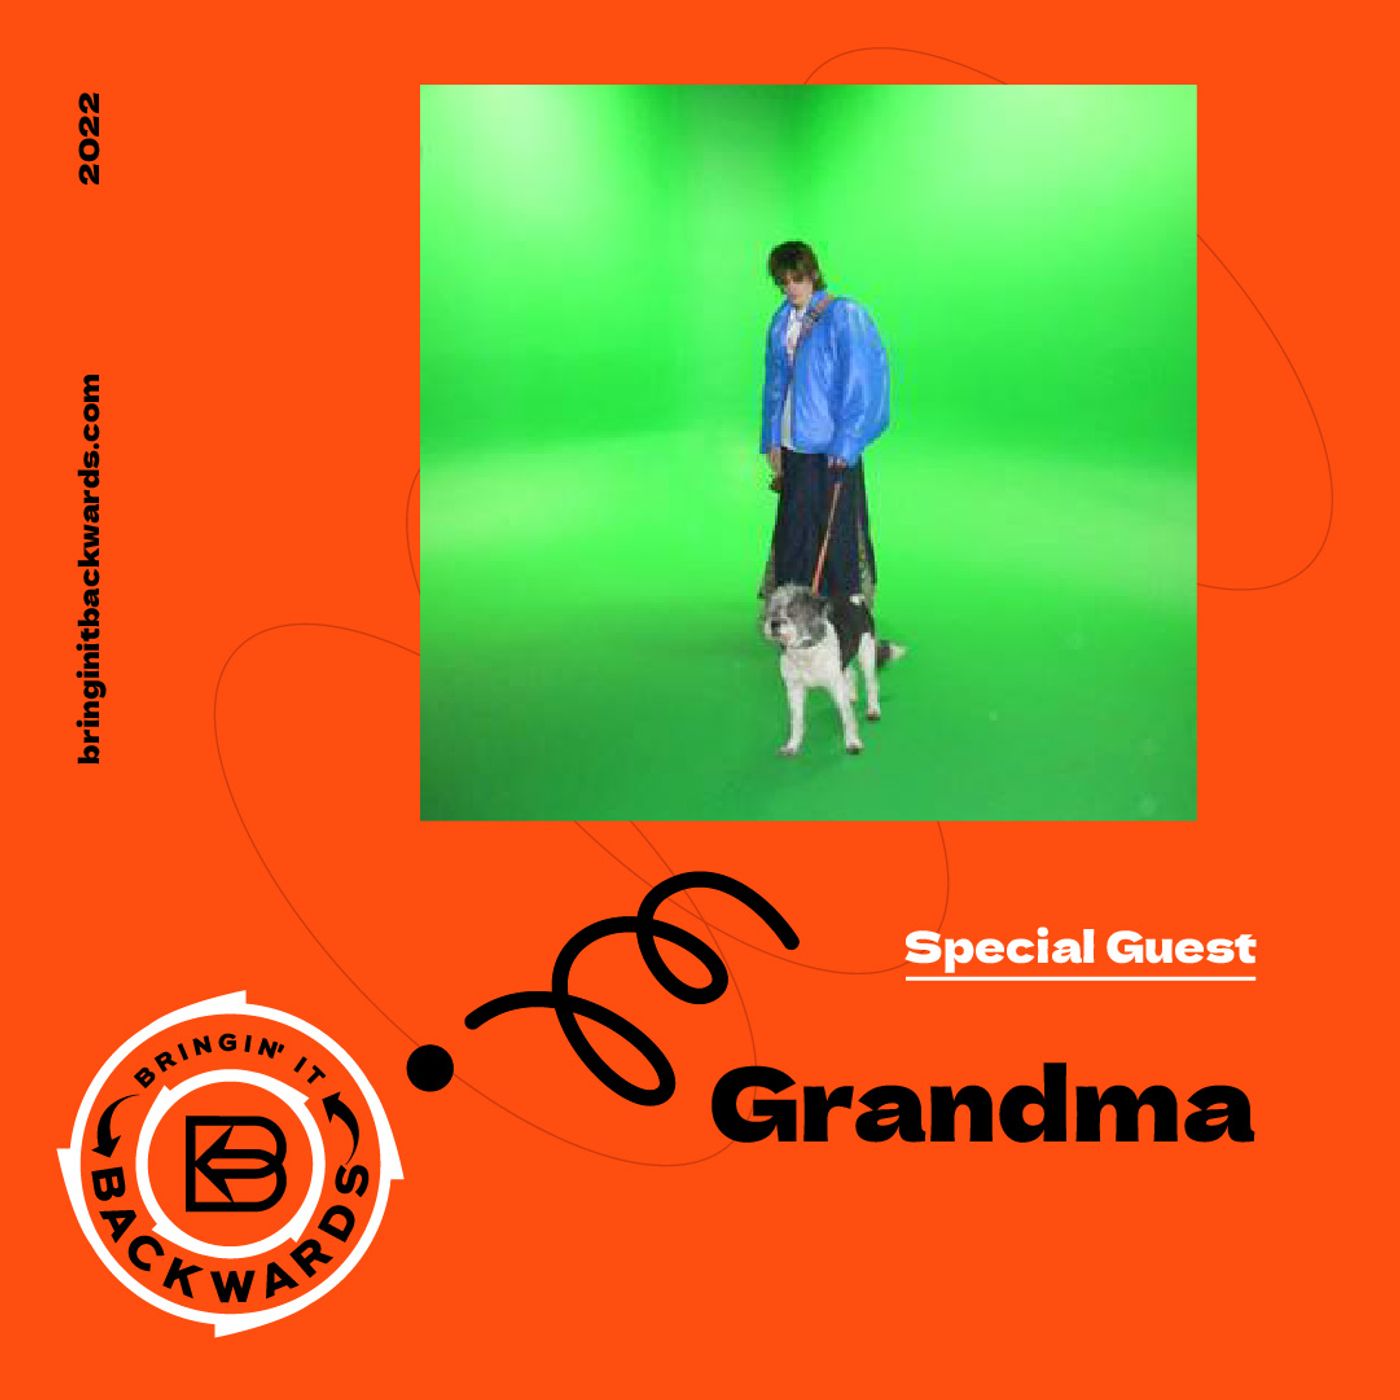 Interview with grandma Image